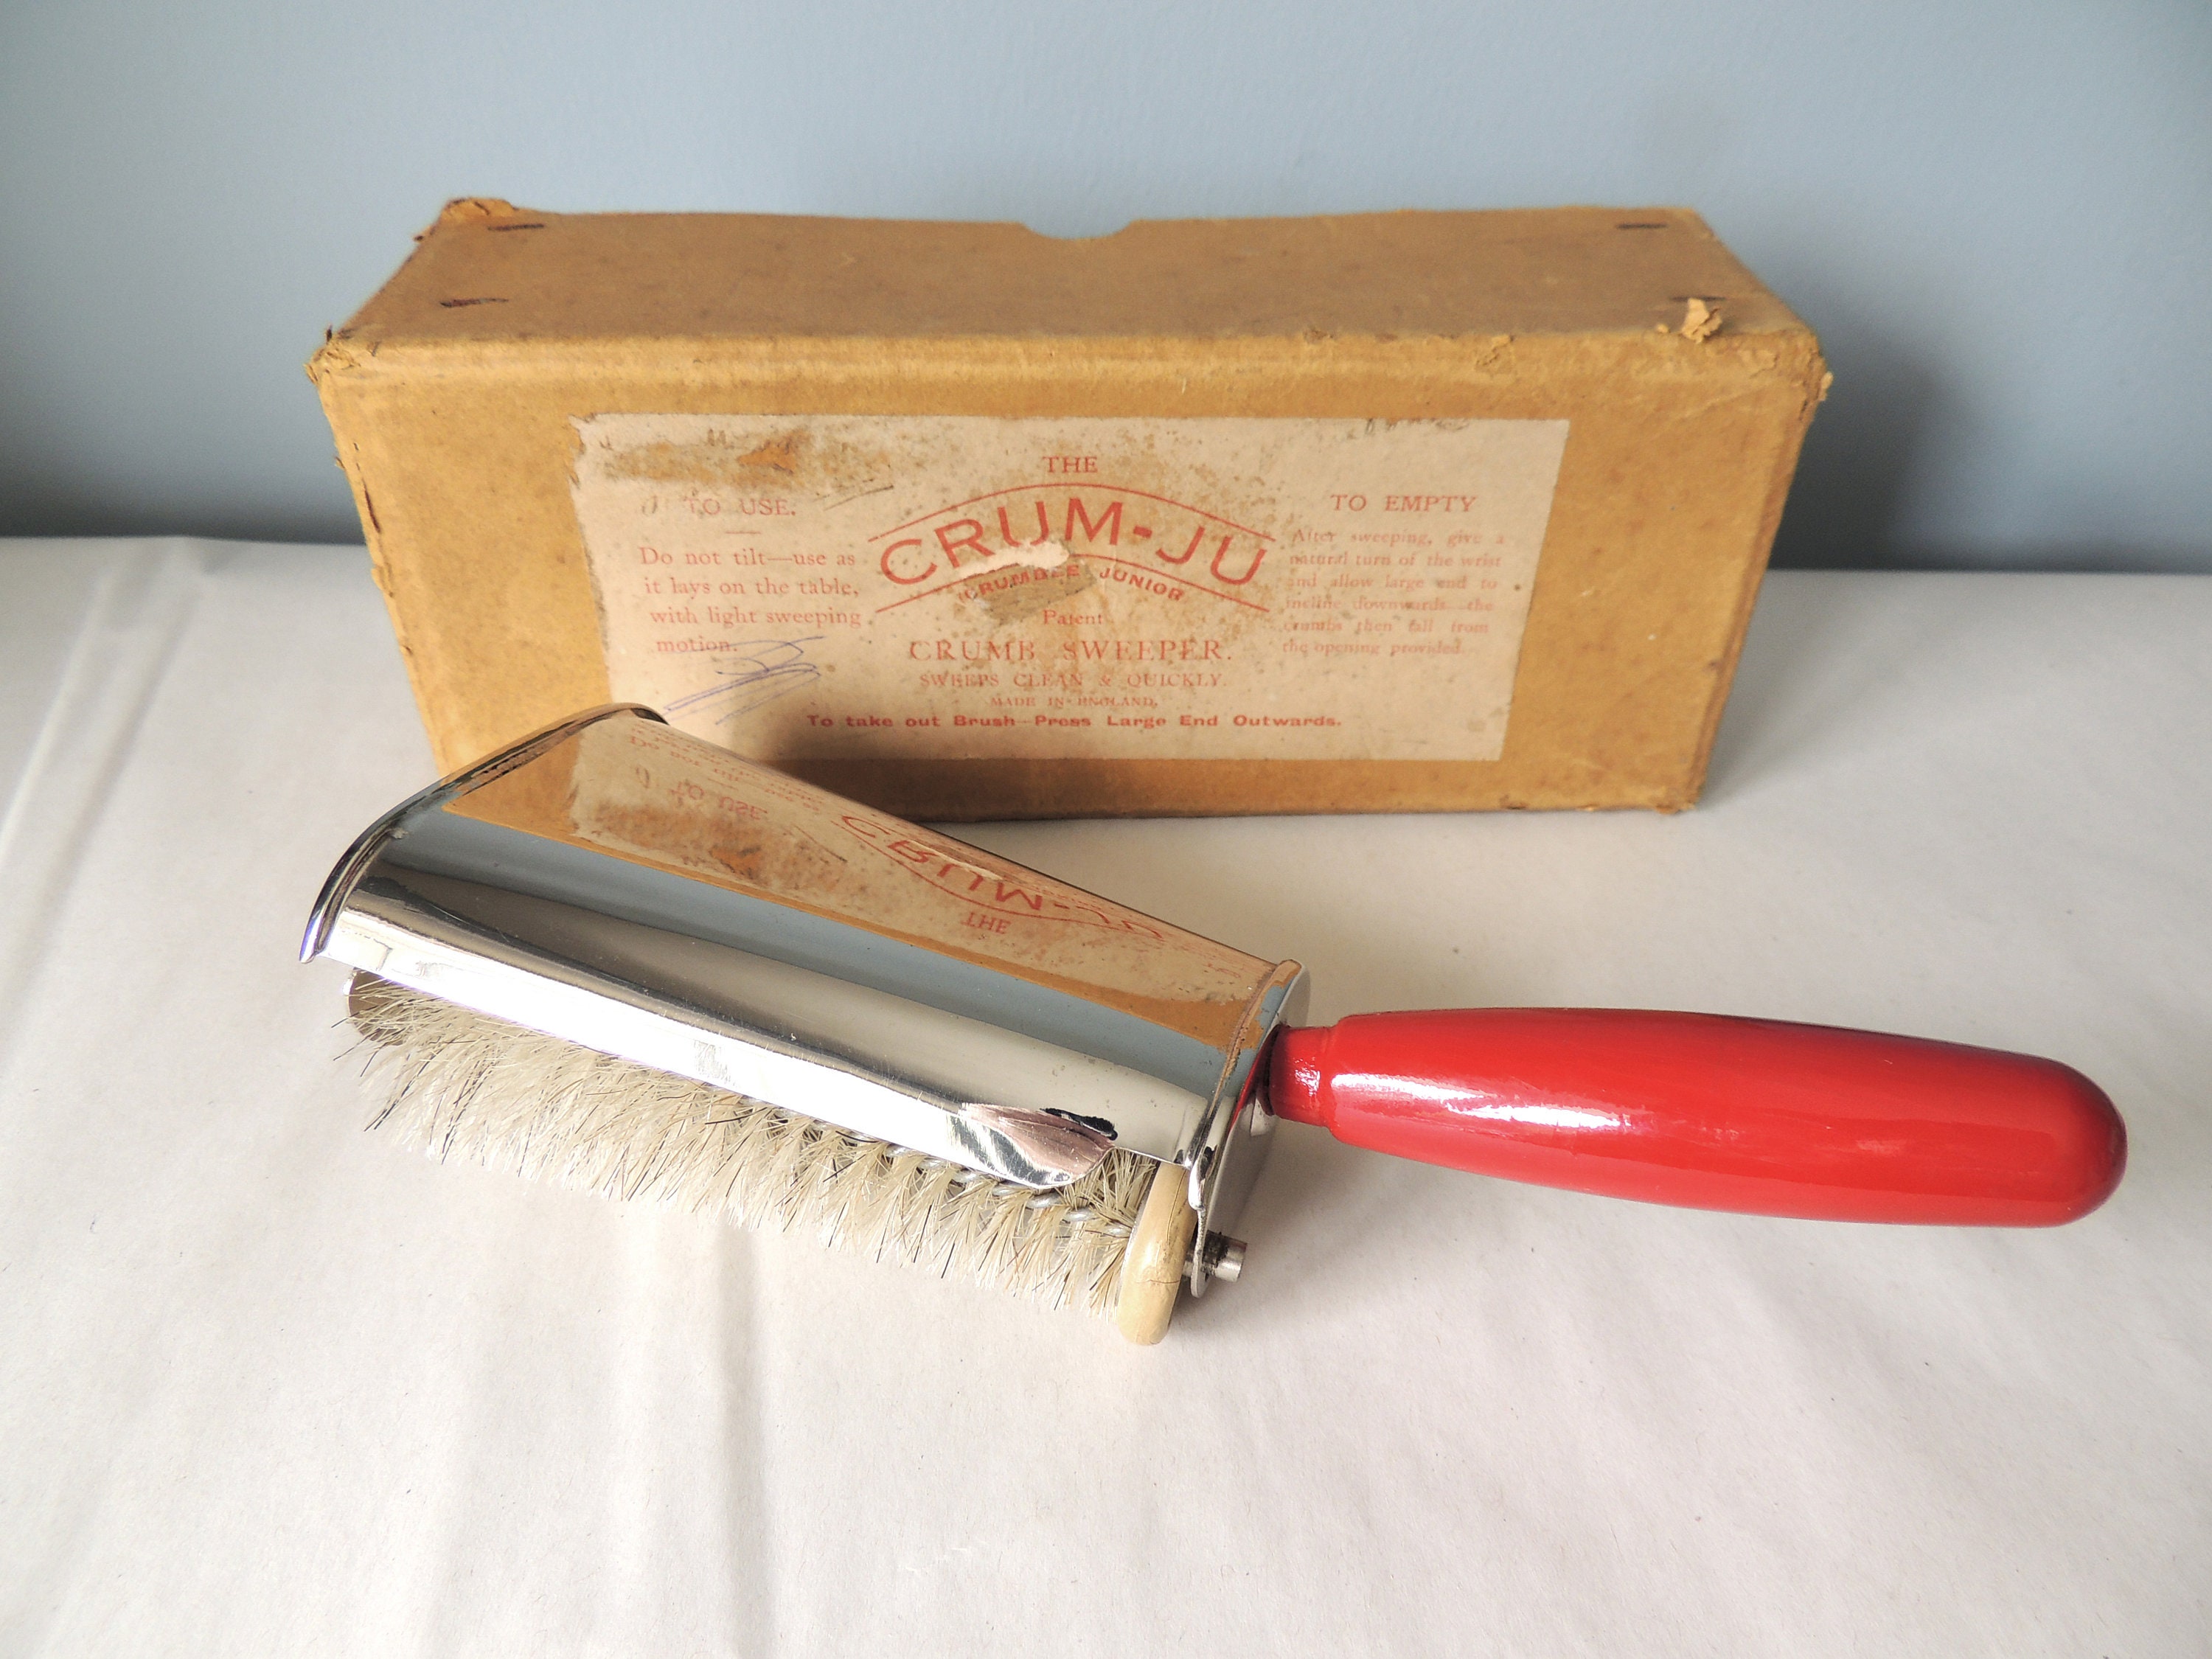 Vintage Fuller Brush Company Table-Top Crumb Sweeper